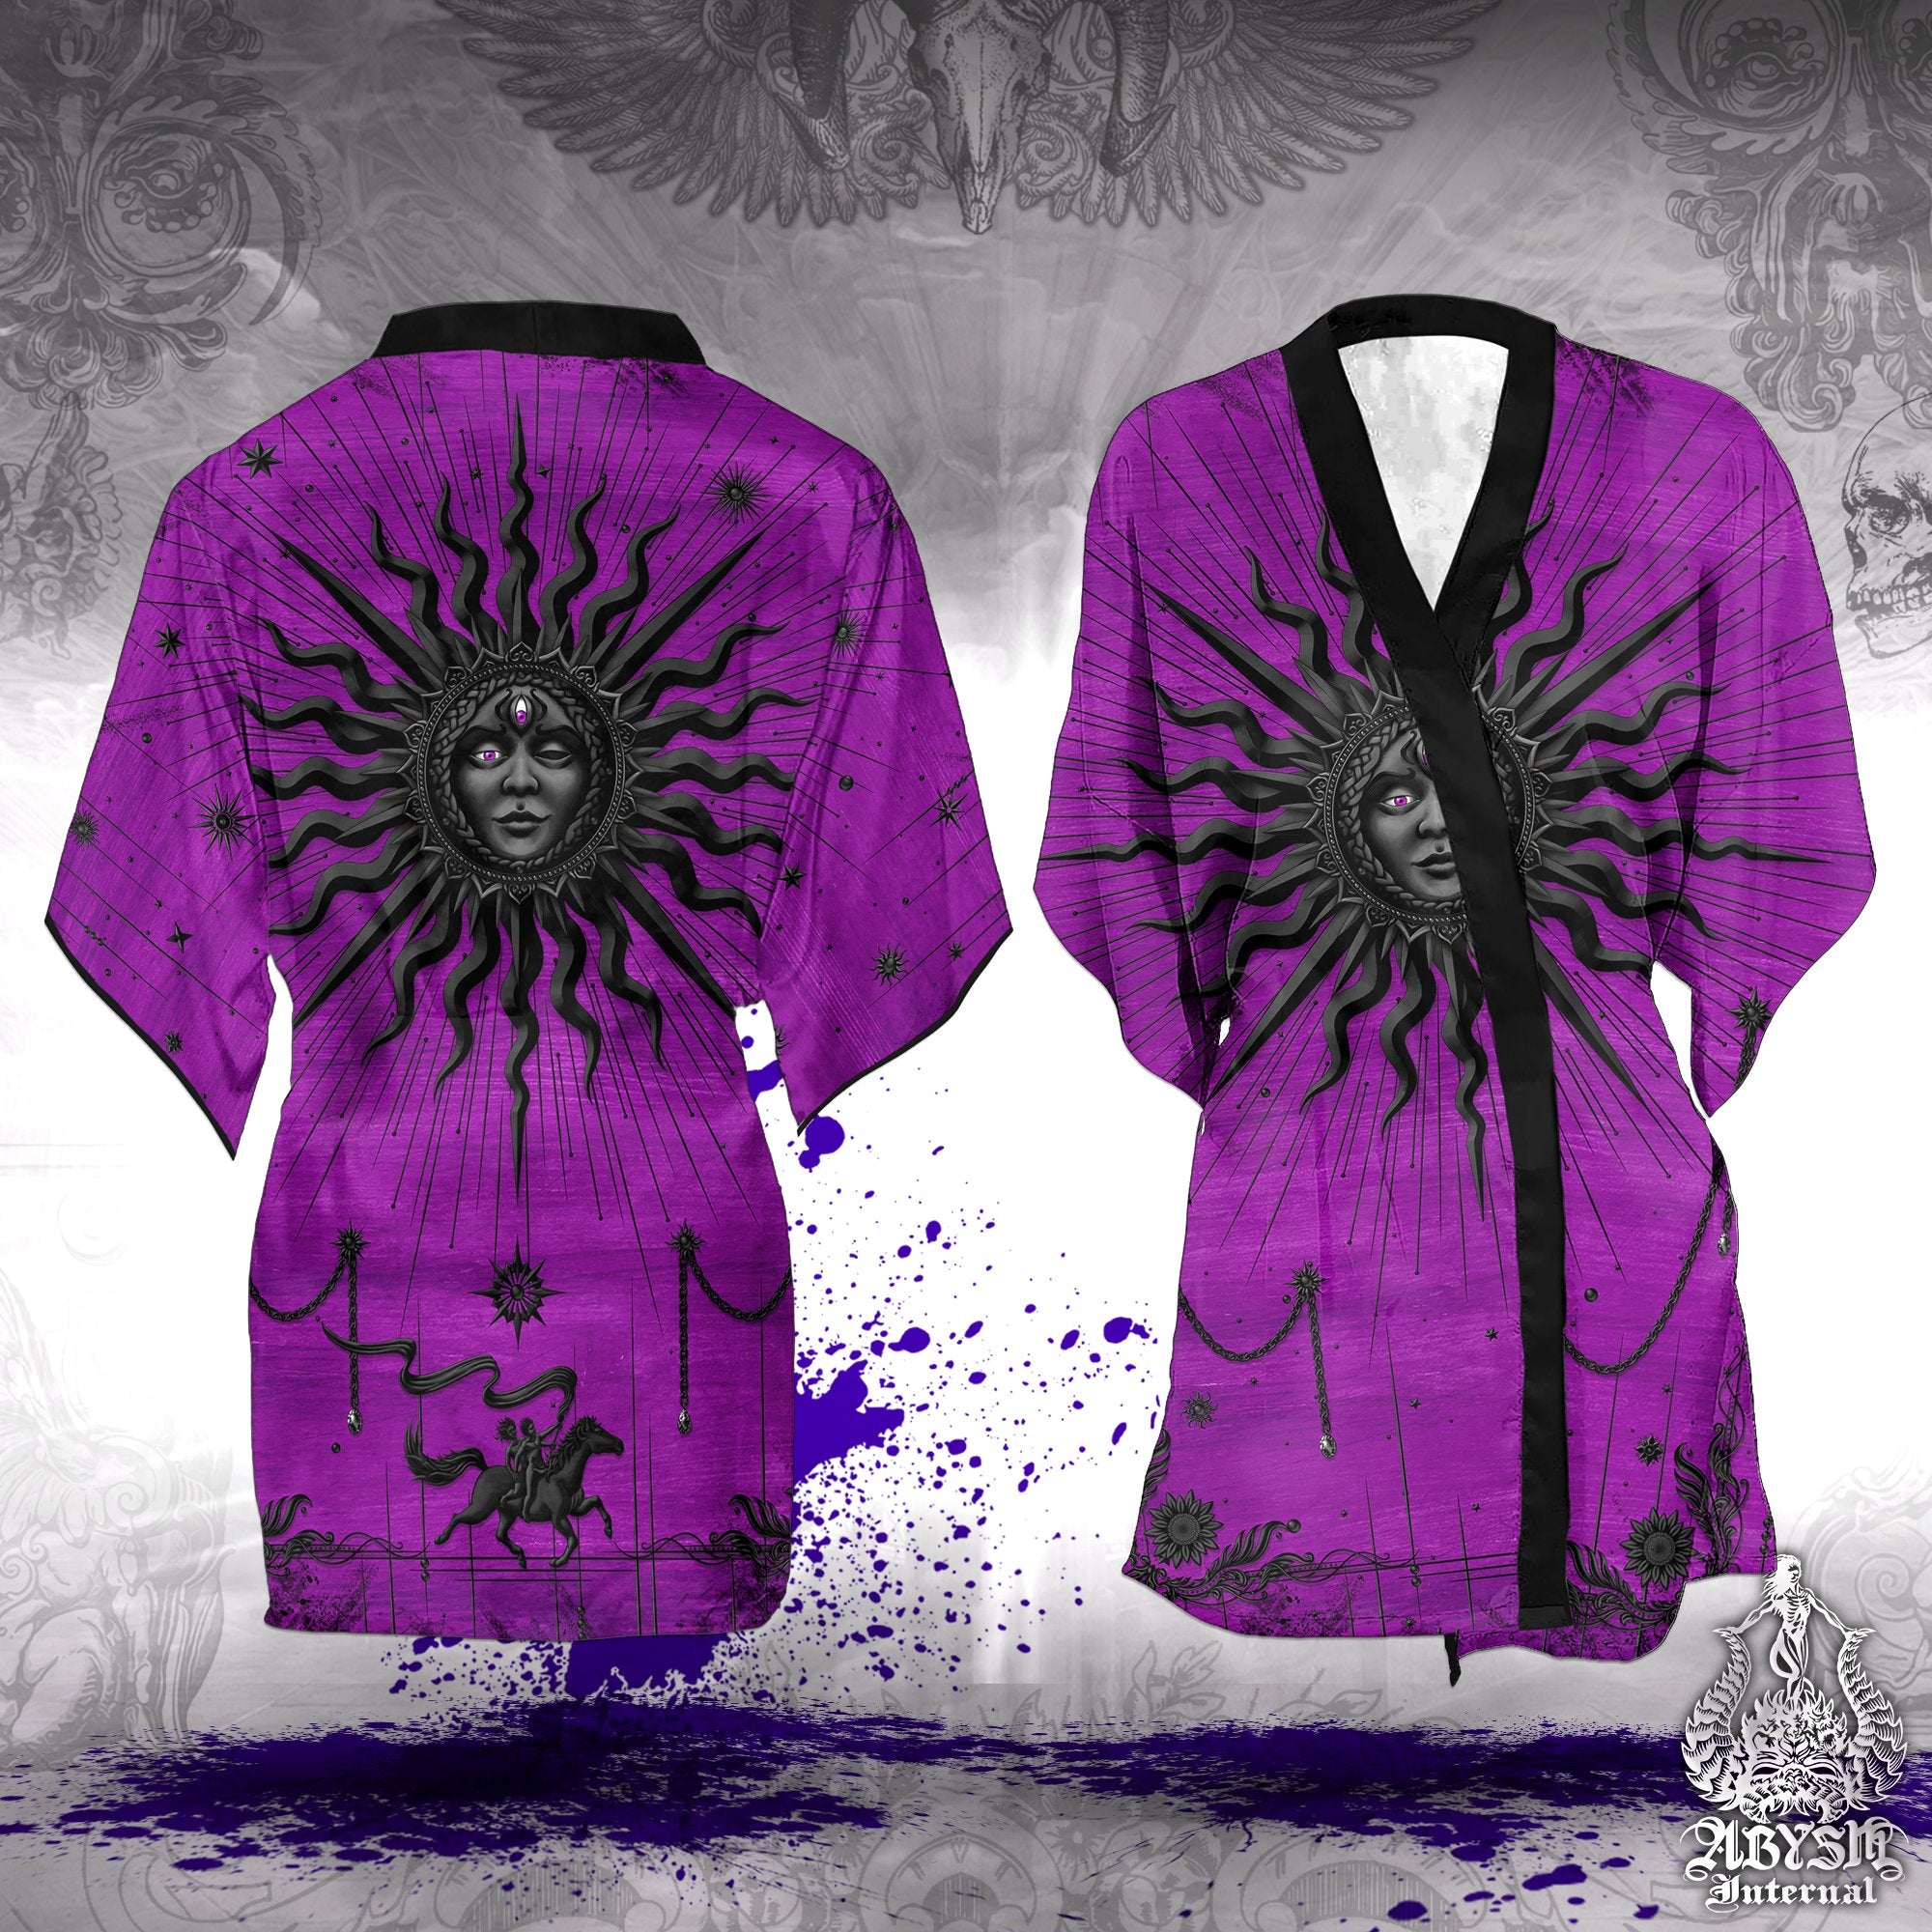 Pastel Goth Short Kimono Robe, Sun Beach Party Outfit, Tarot Arcana Coverup, Black and Purple Summer Festival Top, Whimsigoth Clothing, Unisex - Abysm Internal